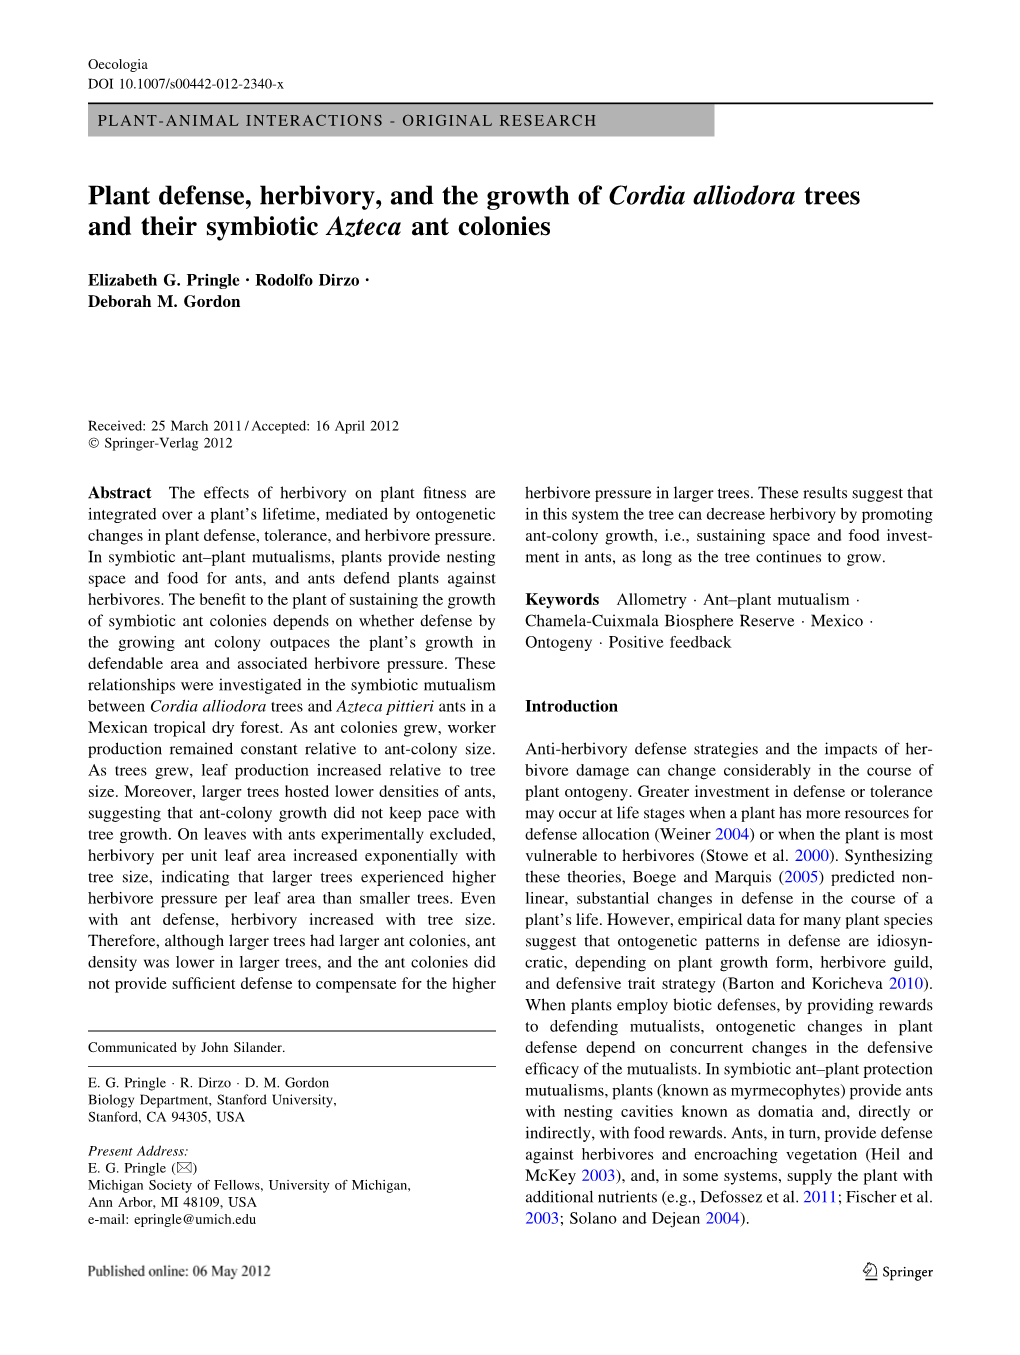 Plant Defense, Herbivory, and the Growth of Cordia Alliodora Trees and Their Symbiotic Azteca Ant Colonies